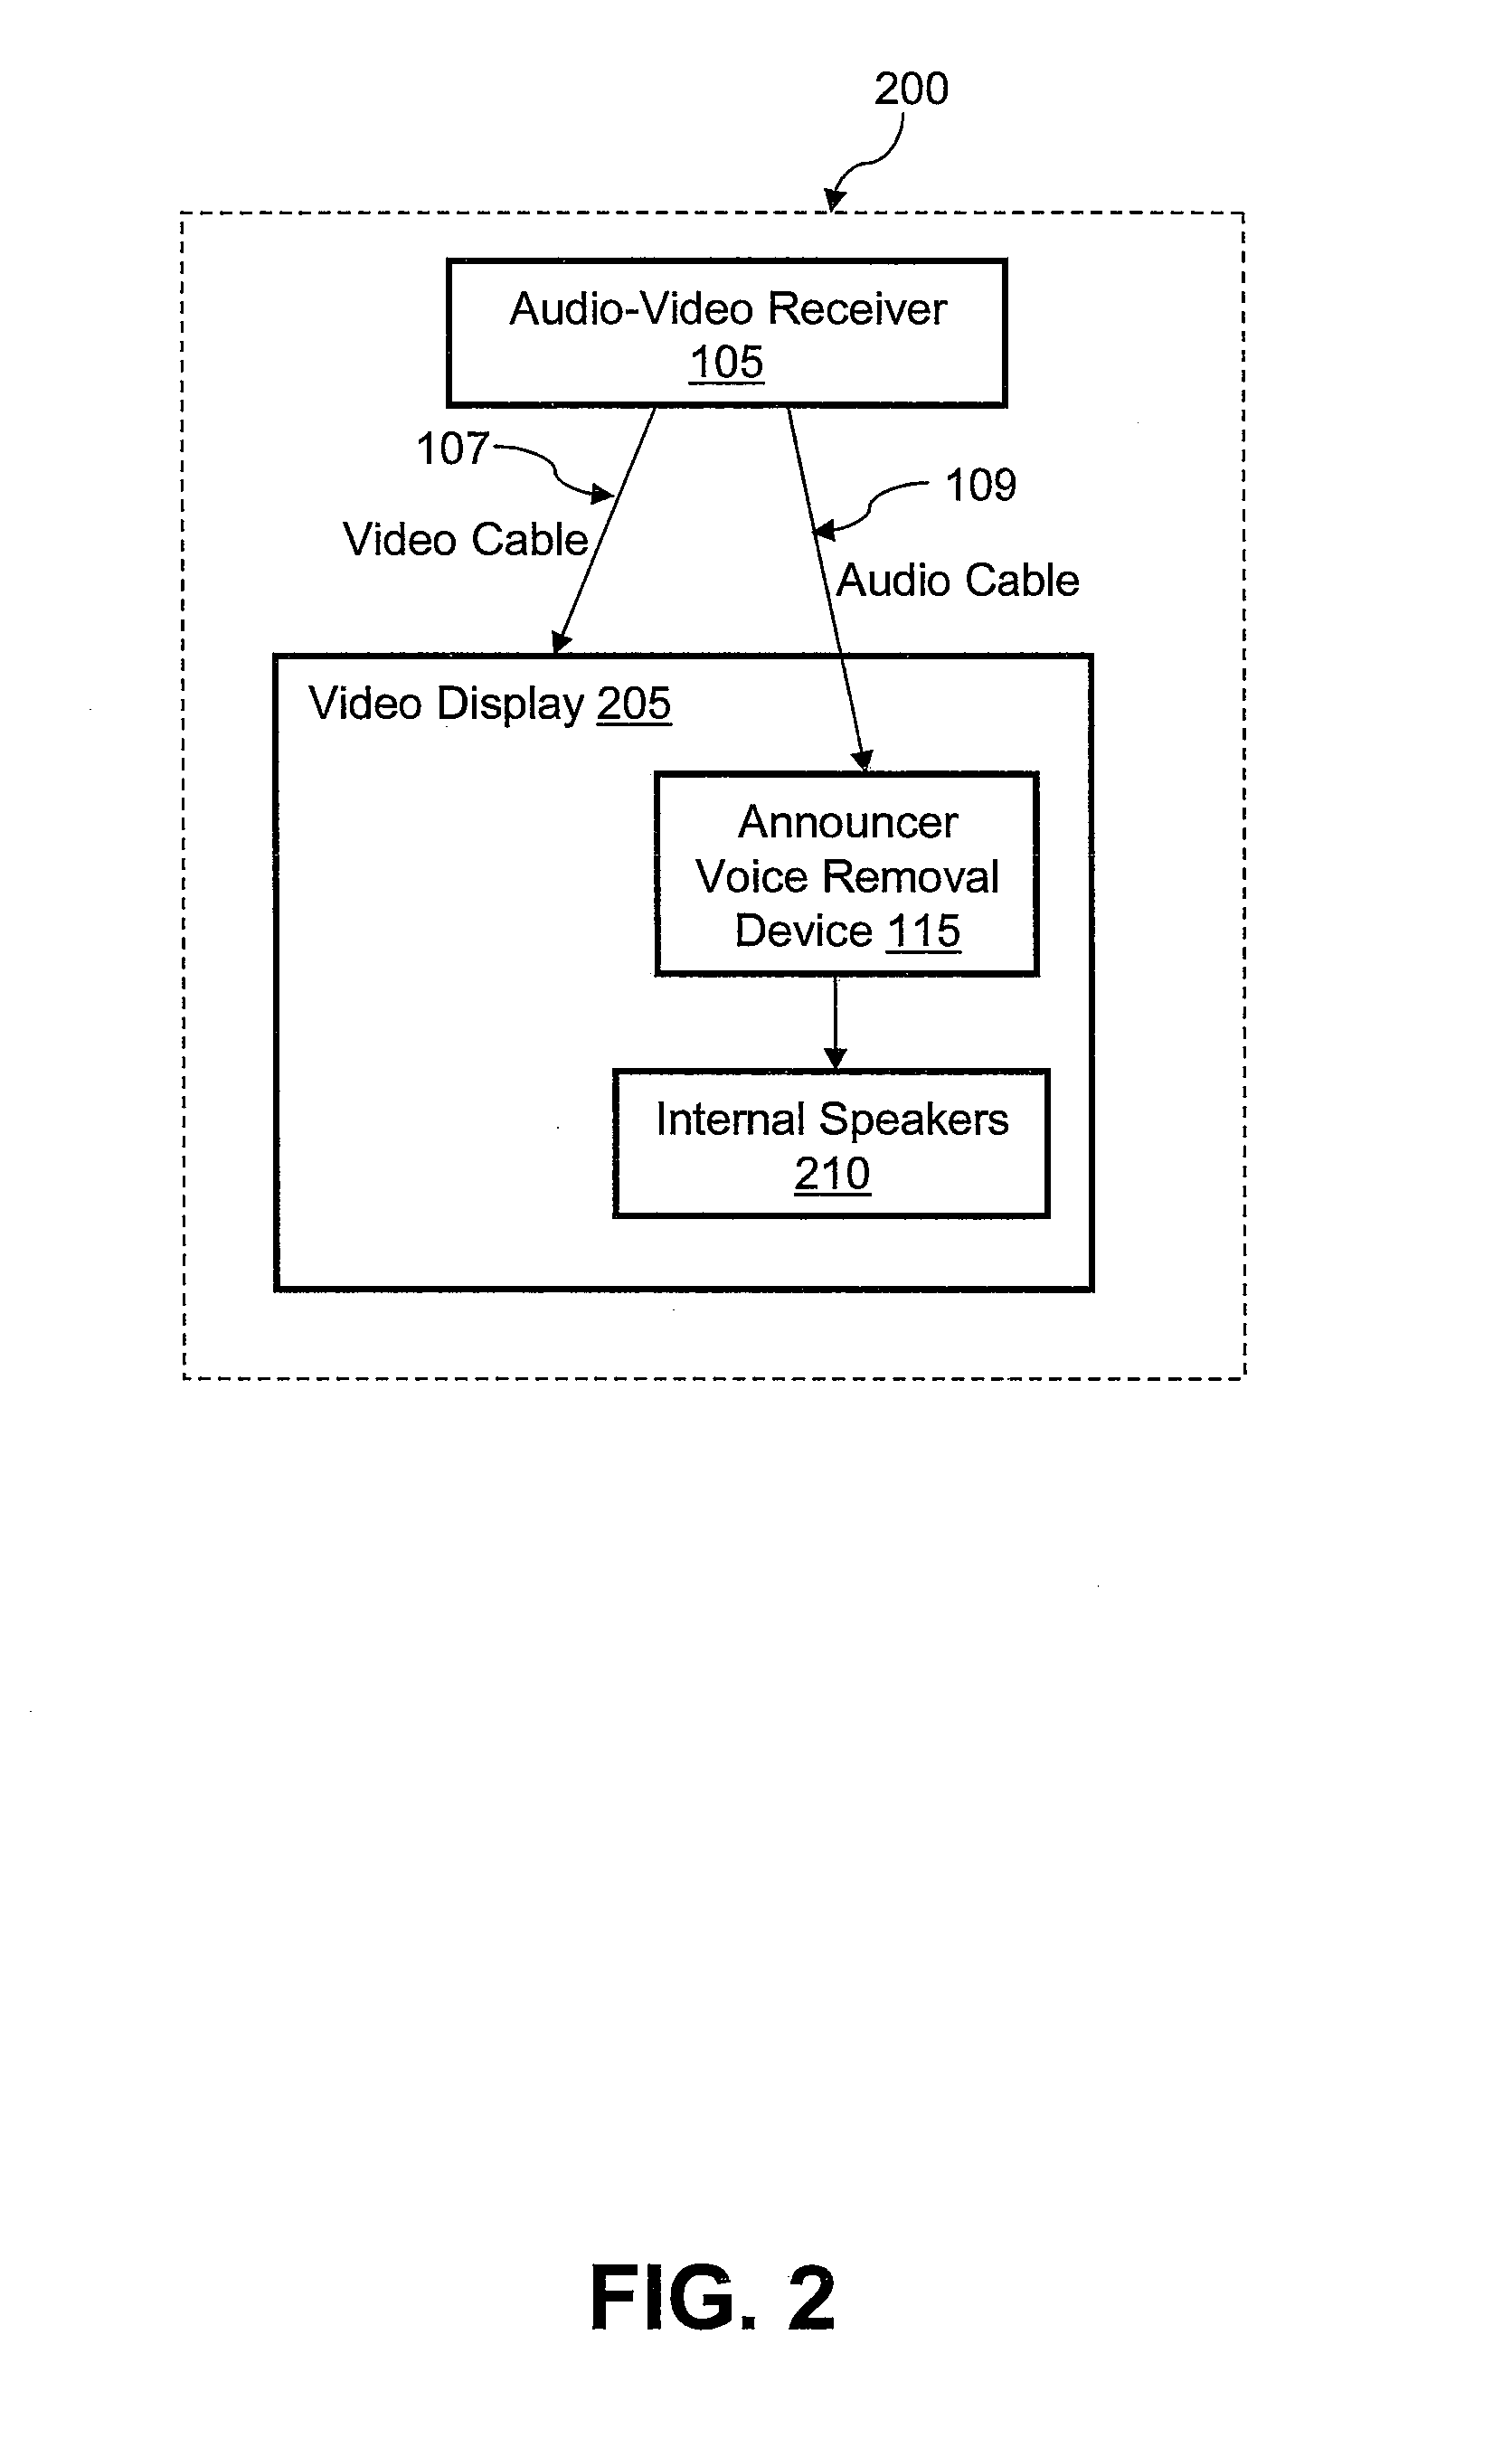 Method and system for automatic announcer voice removal from a televised sporting event